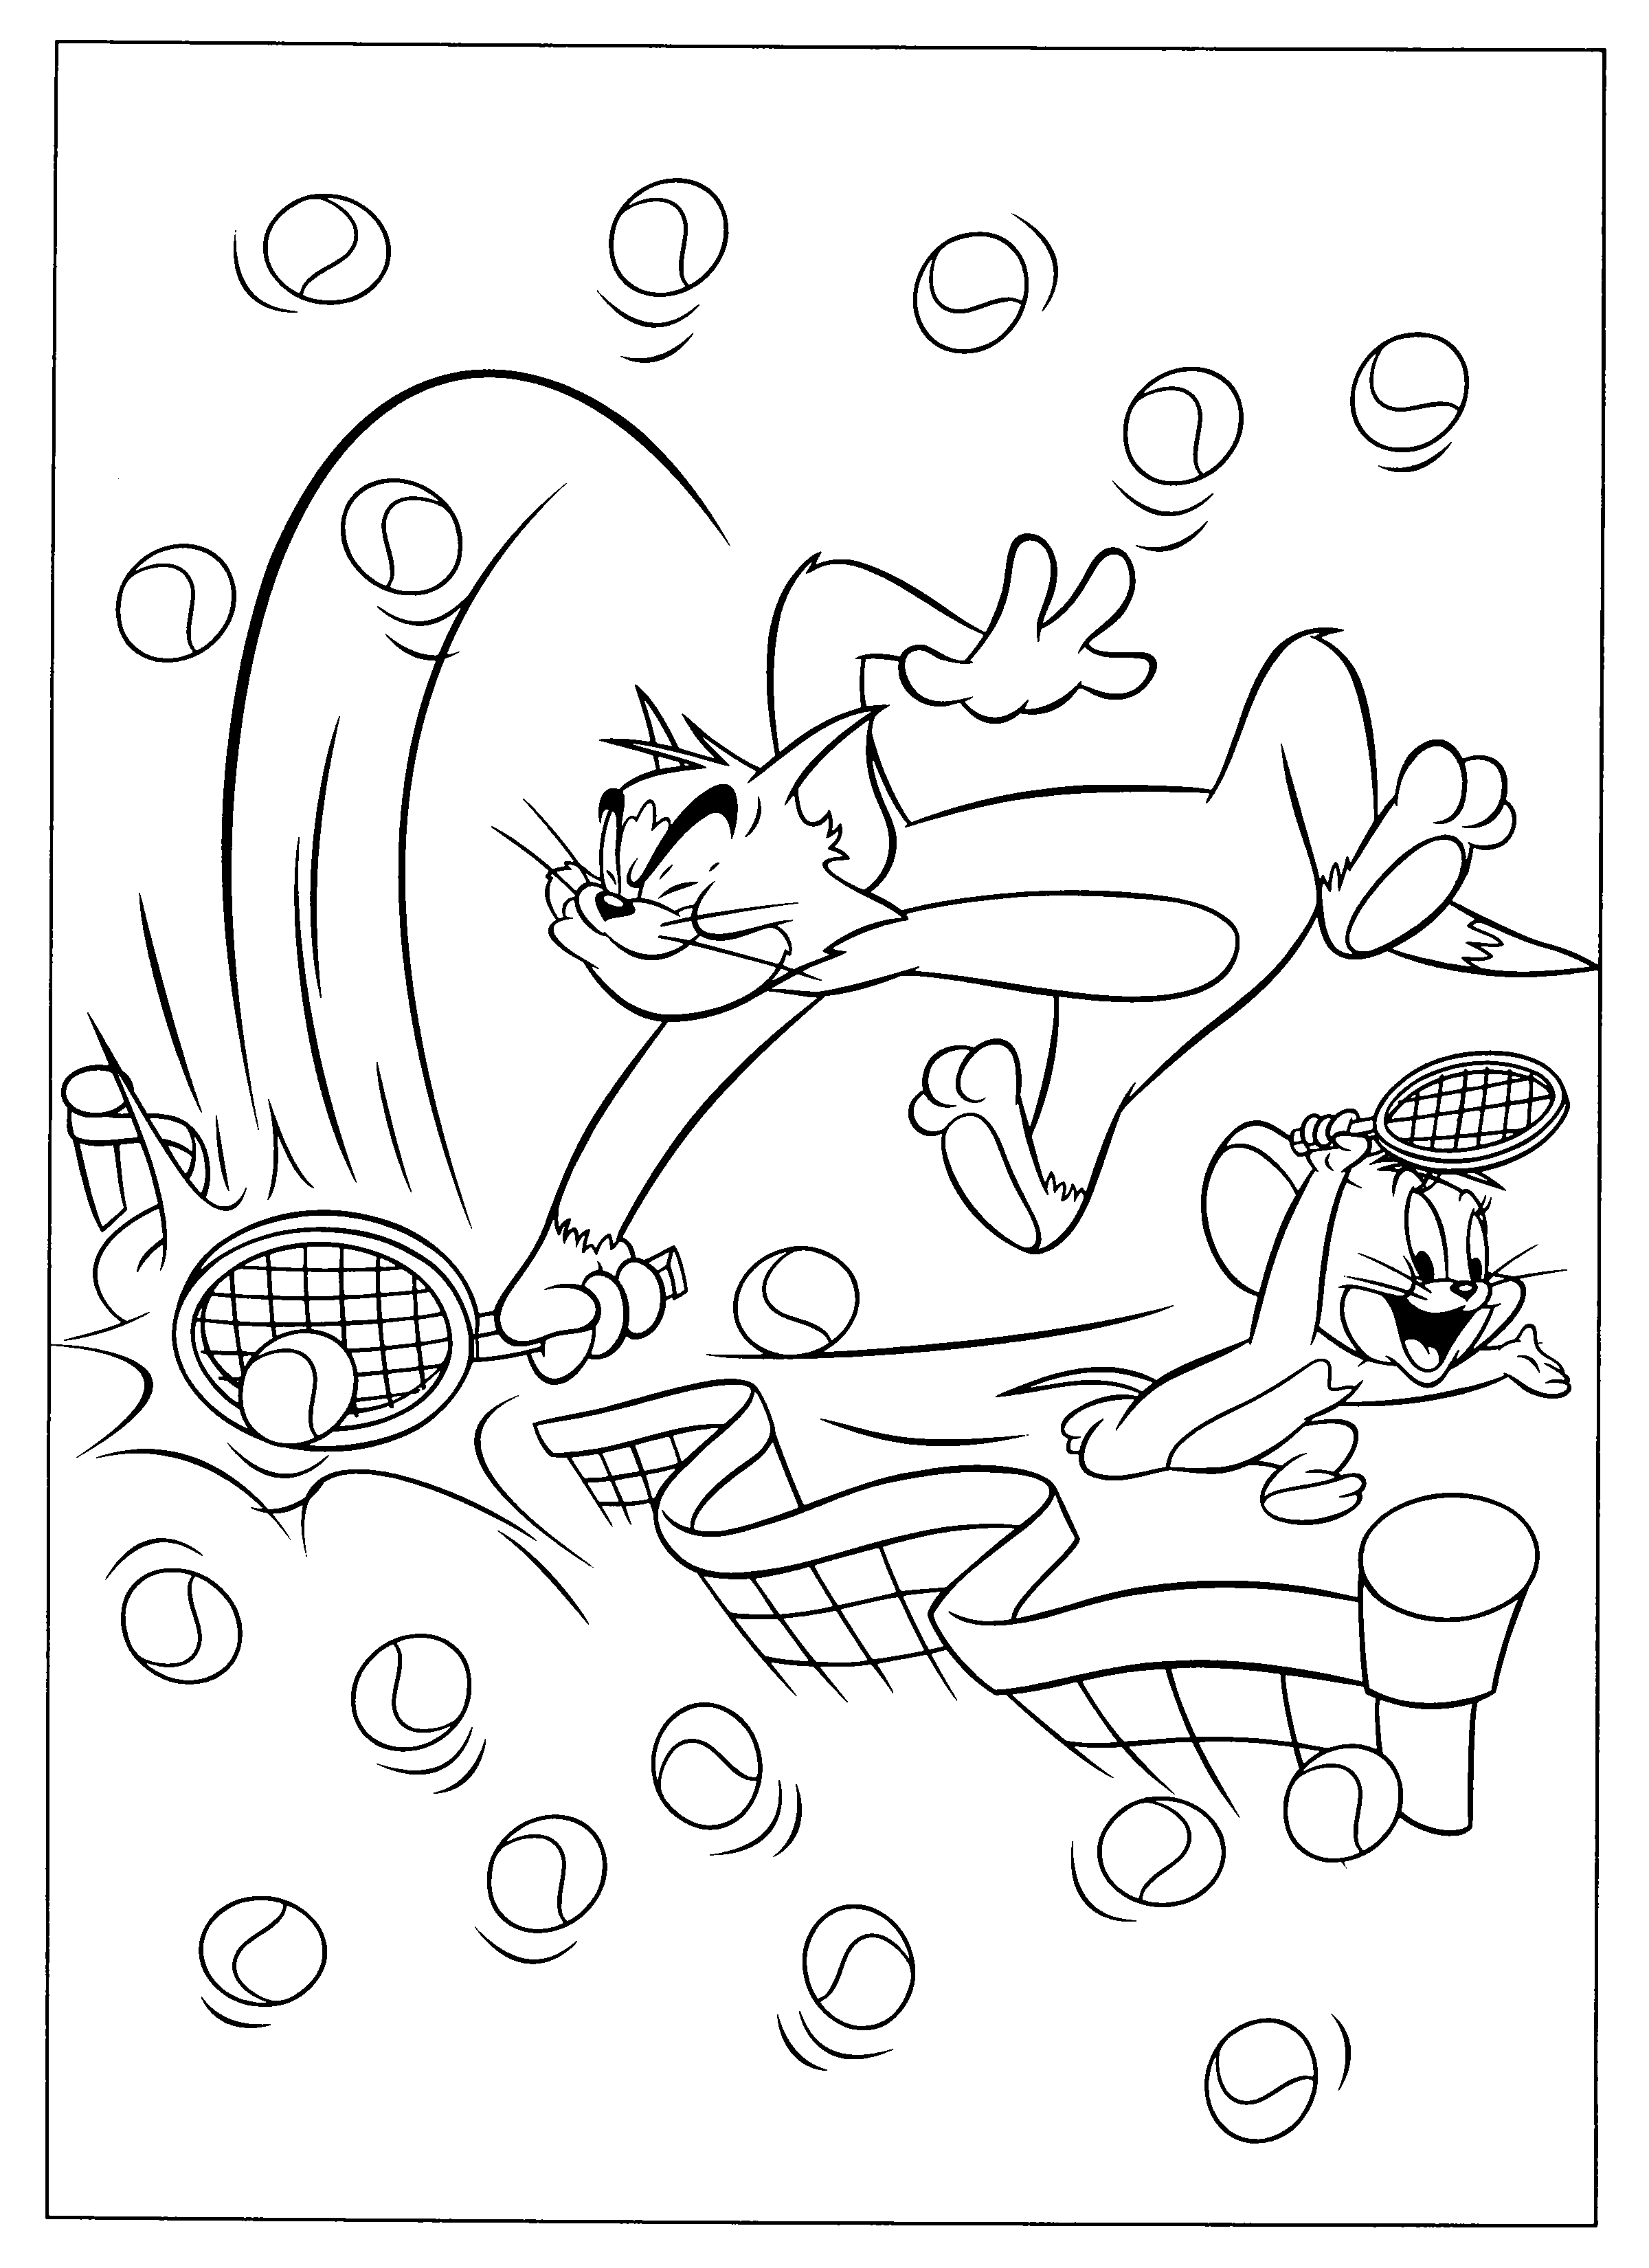 Tom and jerry coloring pages